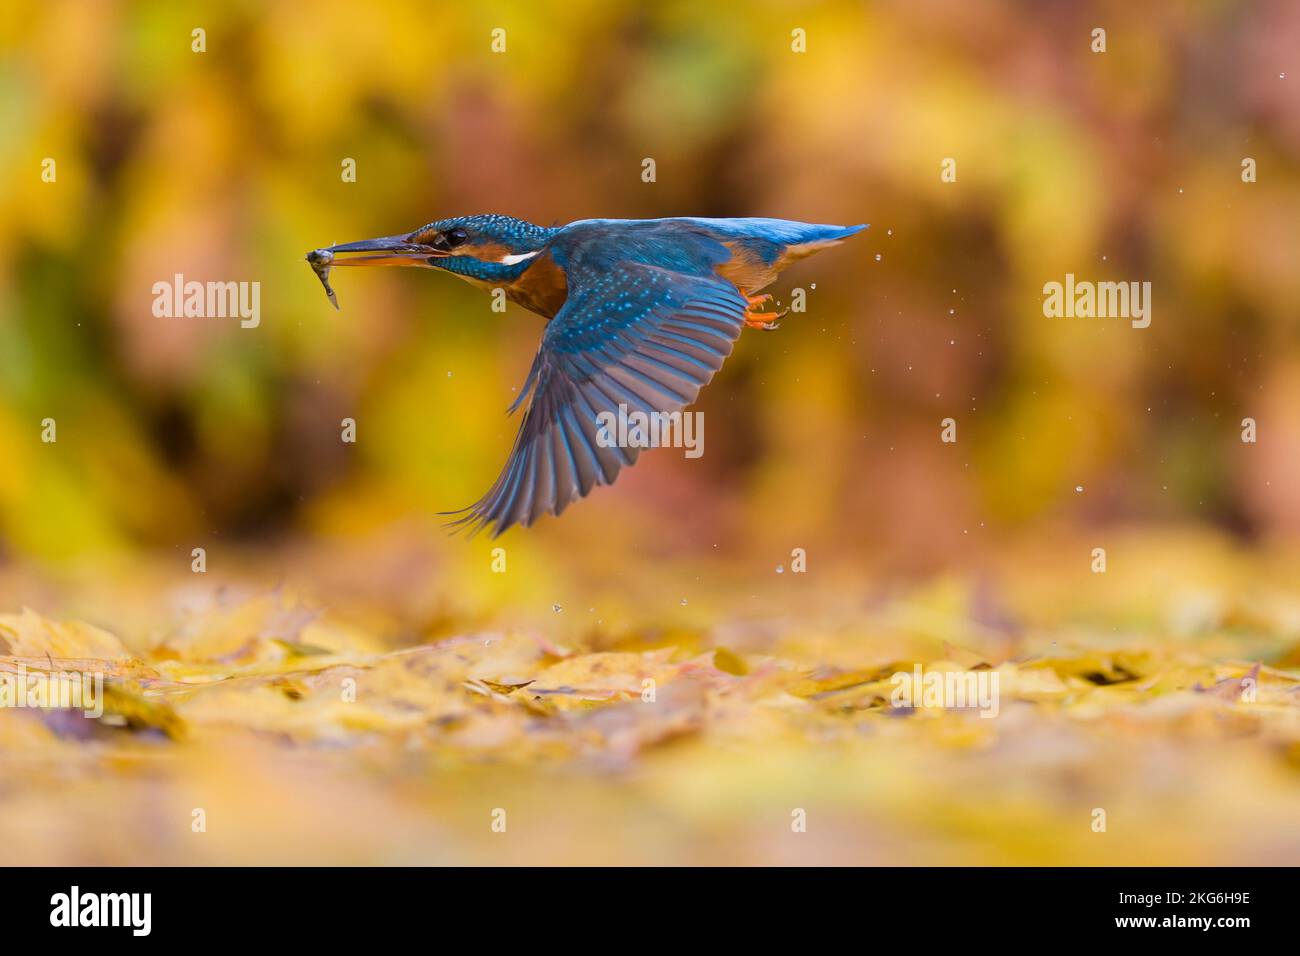 Common kingfisher Alcedo atthis, adult female flying over leaf covered pond with Three-spined stickleback Gasterosteus aculeatus, prey in beak Stock Photo